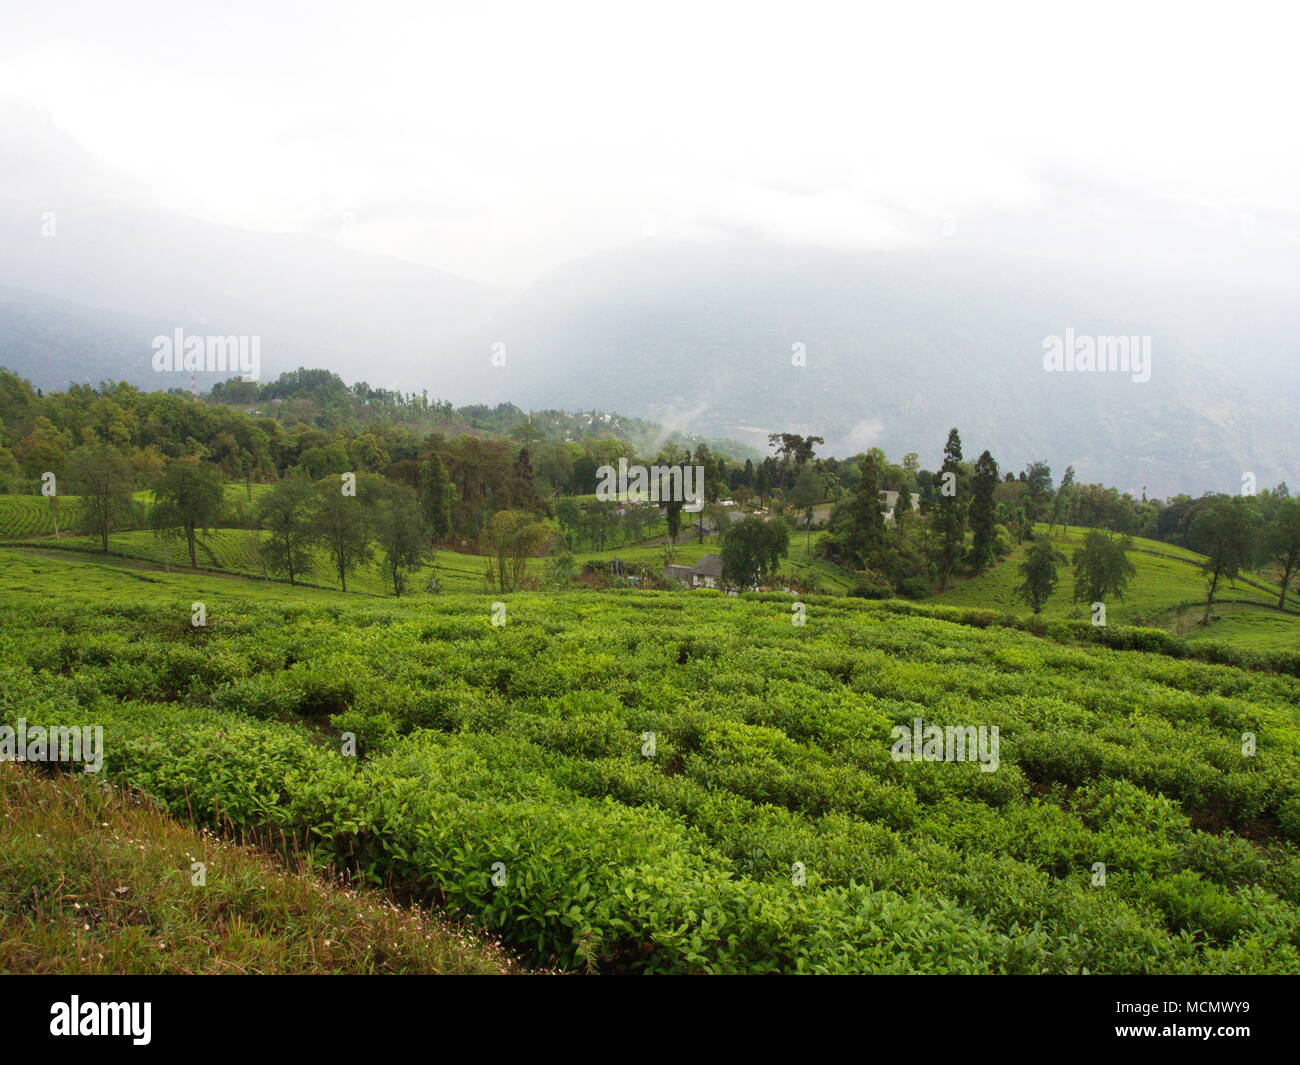 Darjeeling  City, INDIA , 15th APRIL 2011 : The Most Famous TEA Plantation in Darjeeling City, India Stock Photo